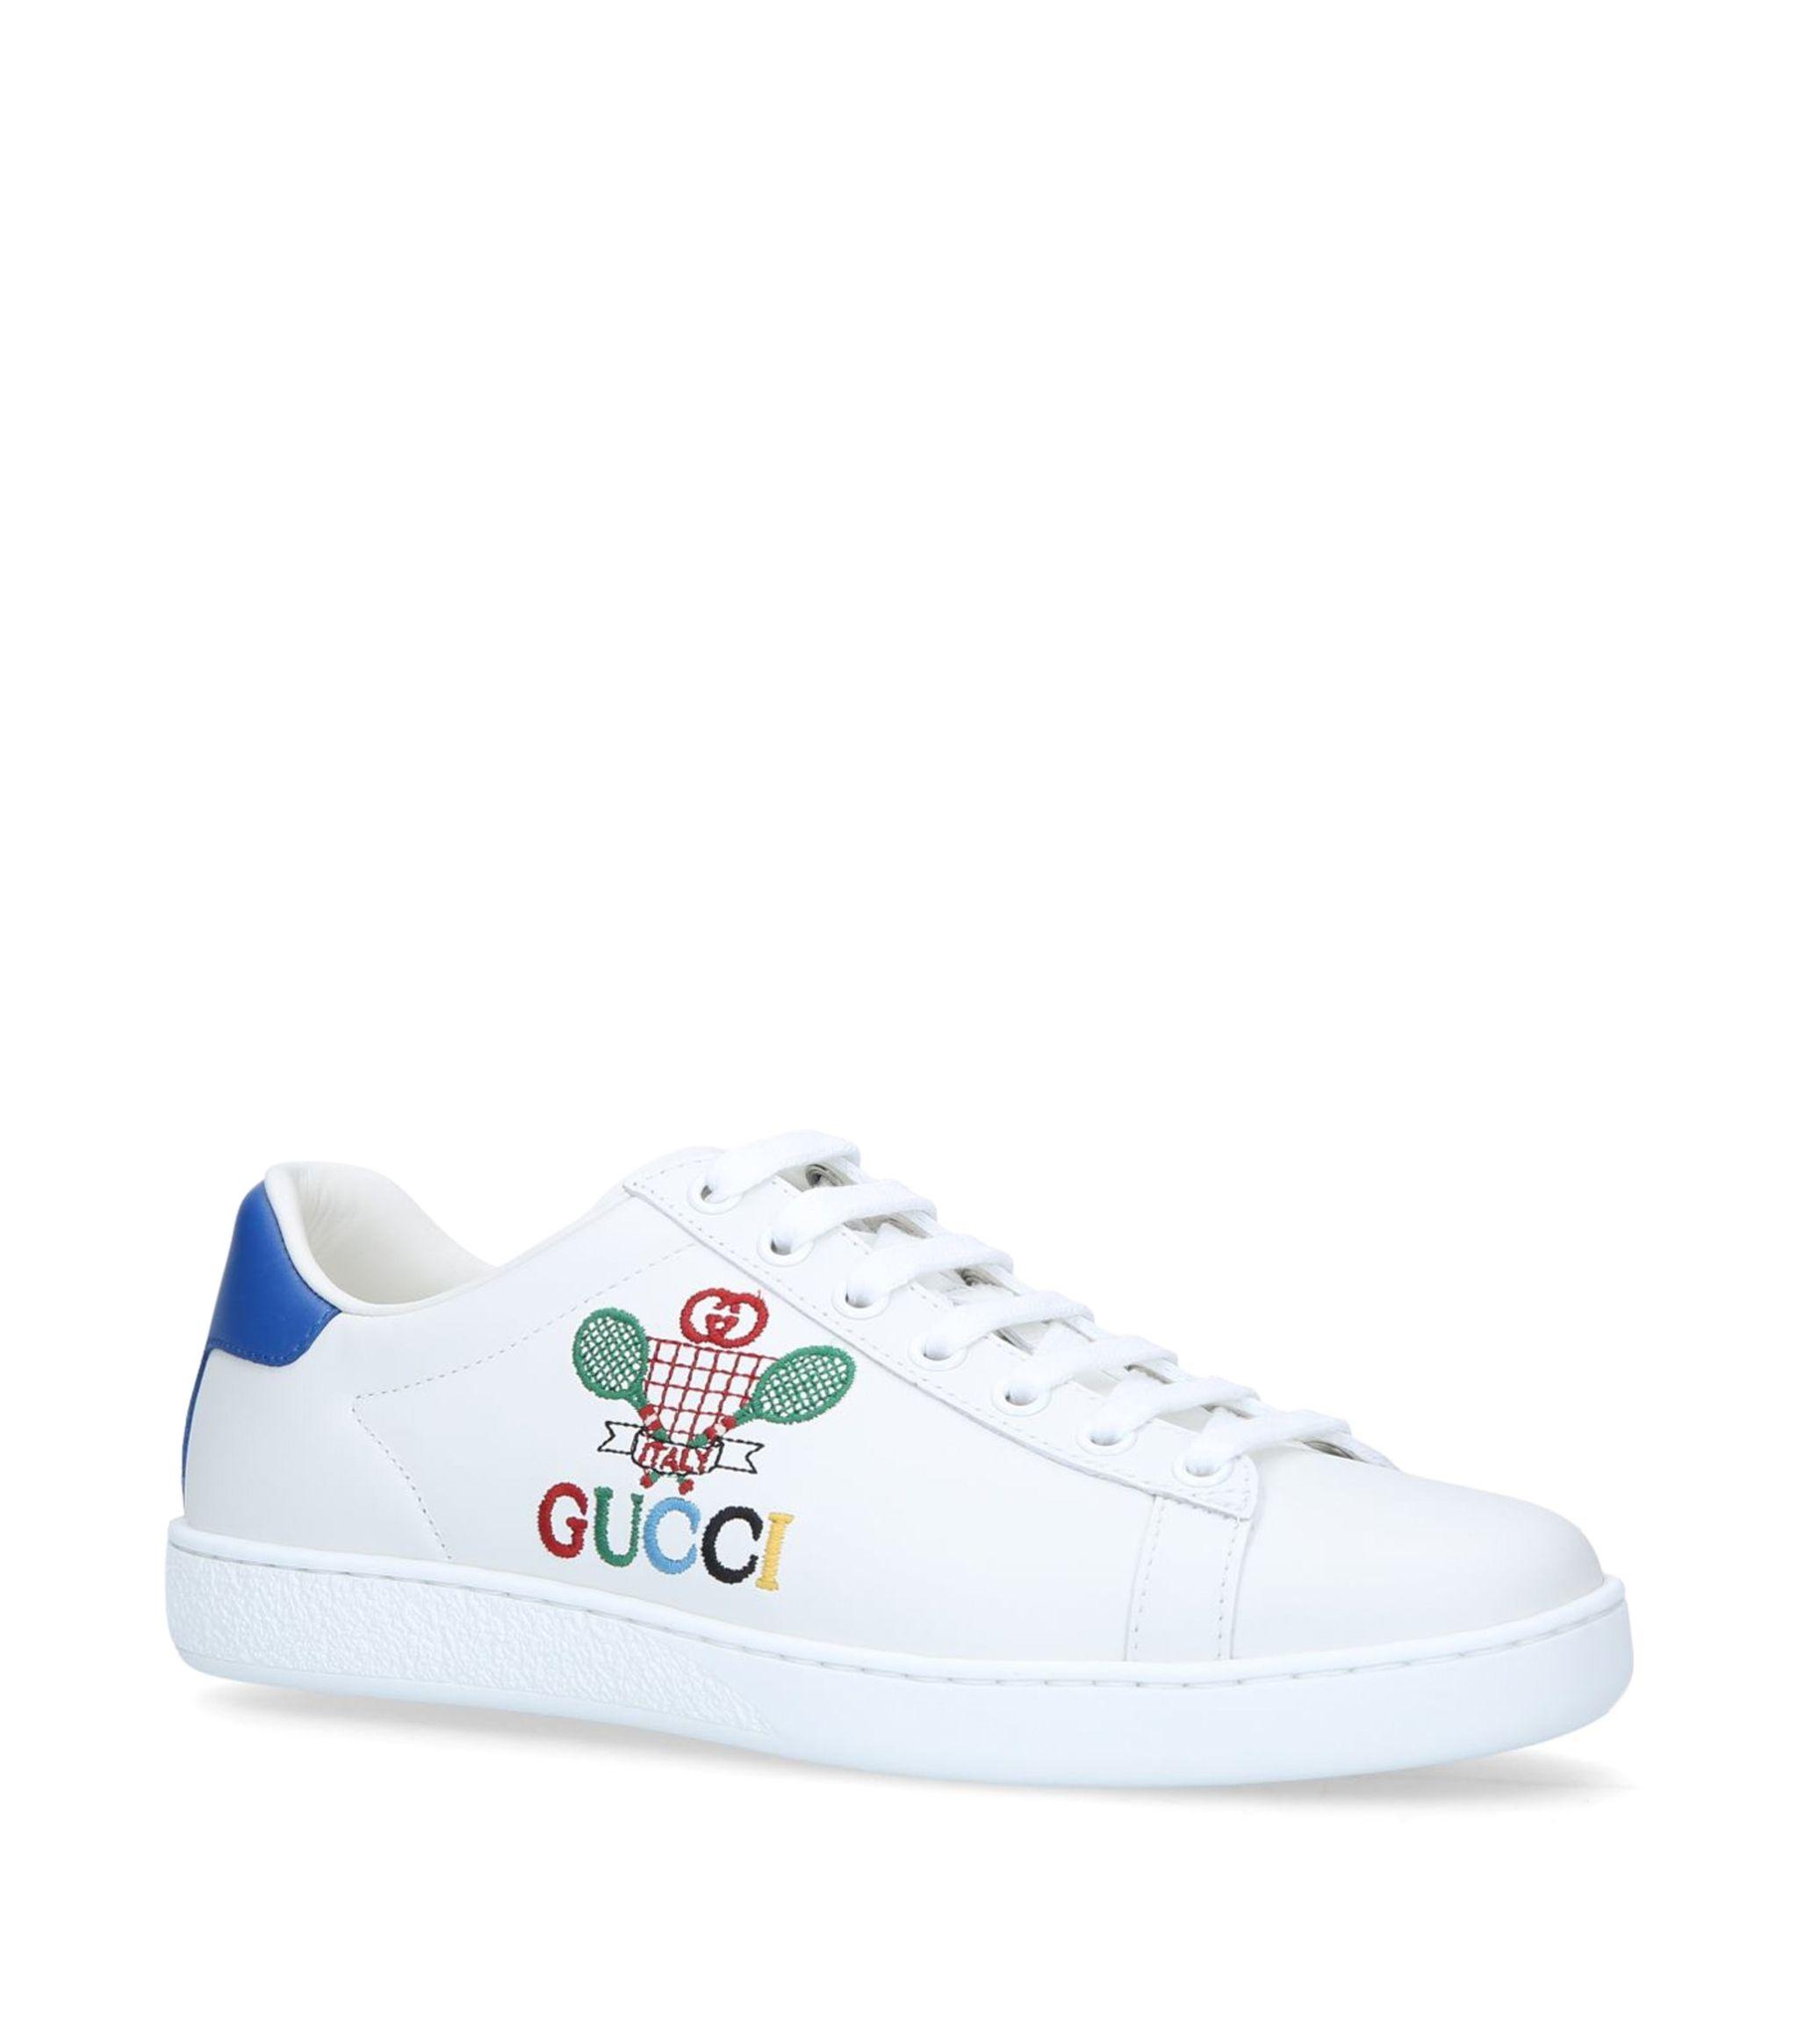 Gucci Leather Tennis Ace Sneakers in White - Save 24% - Lyst